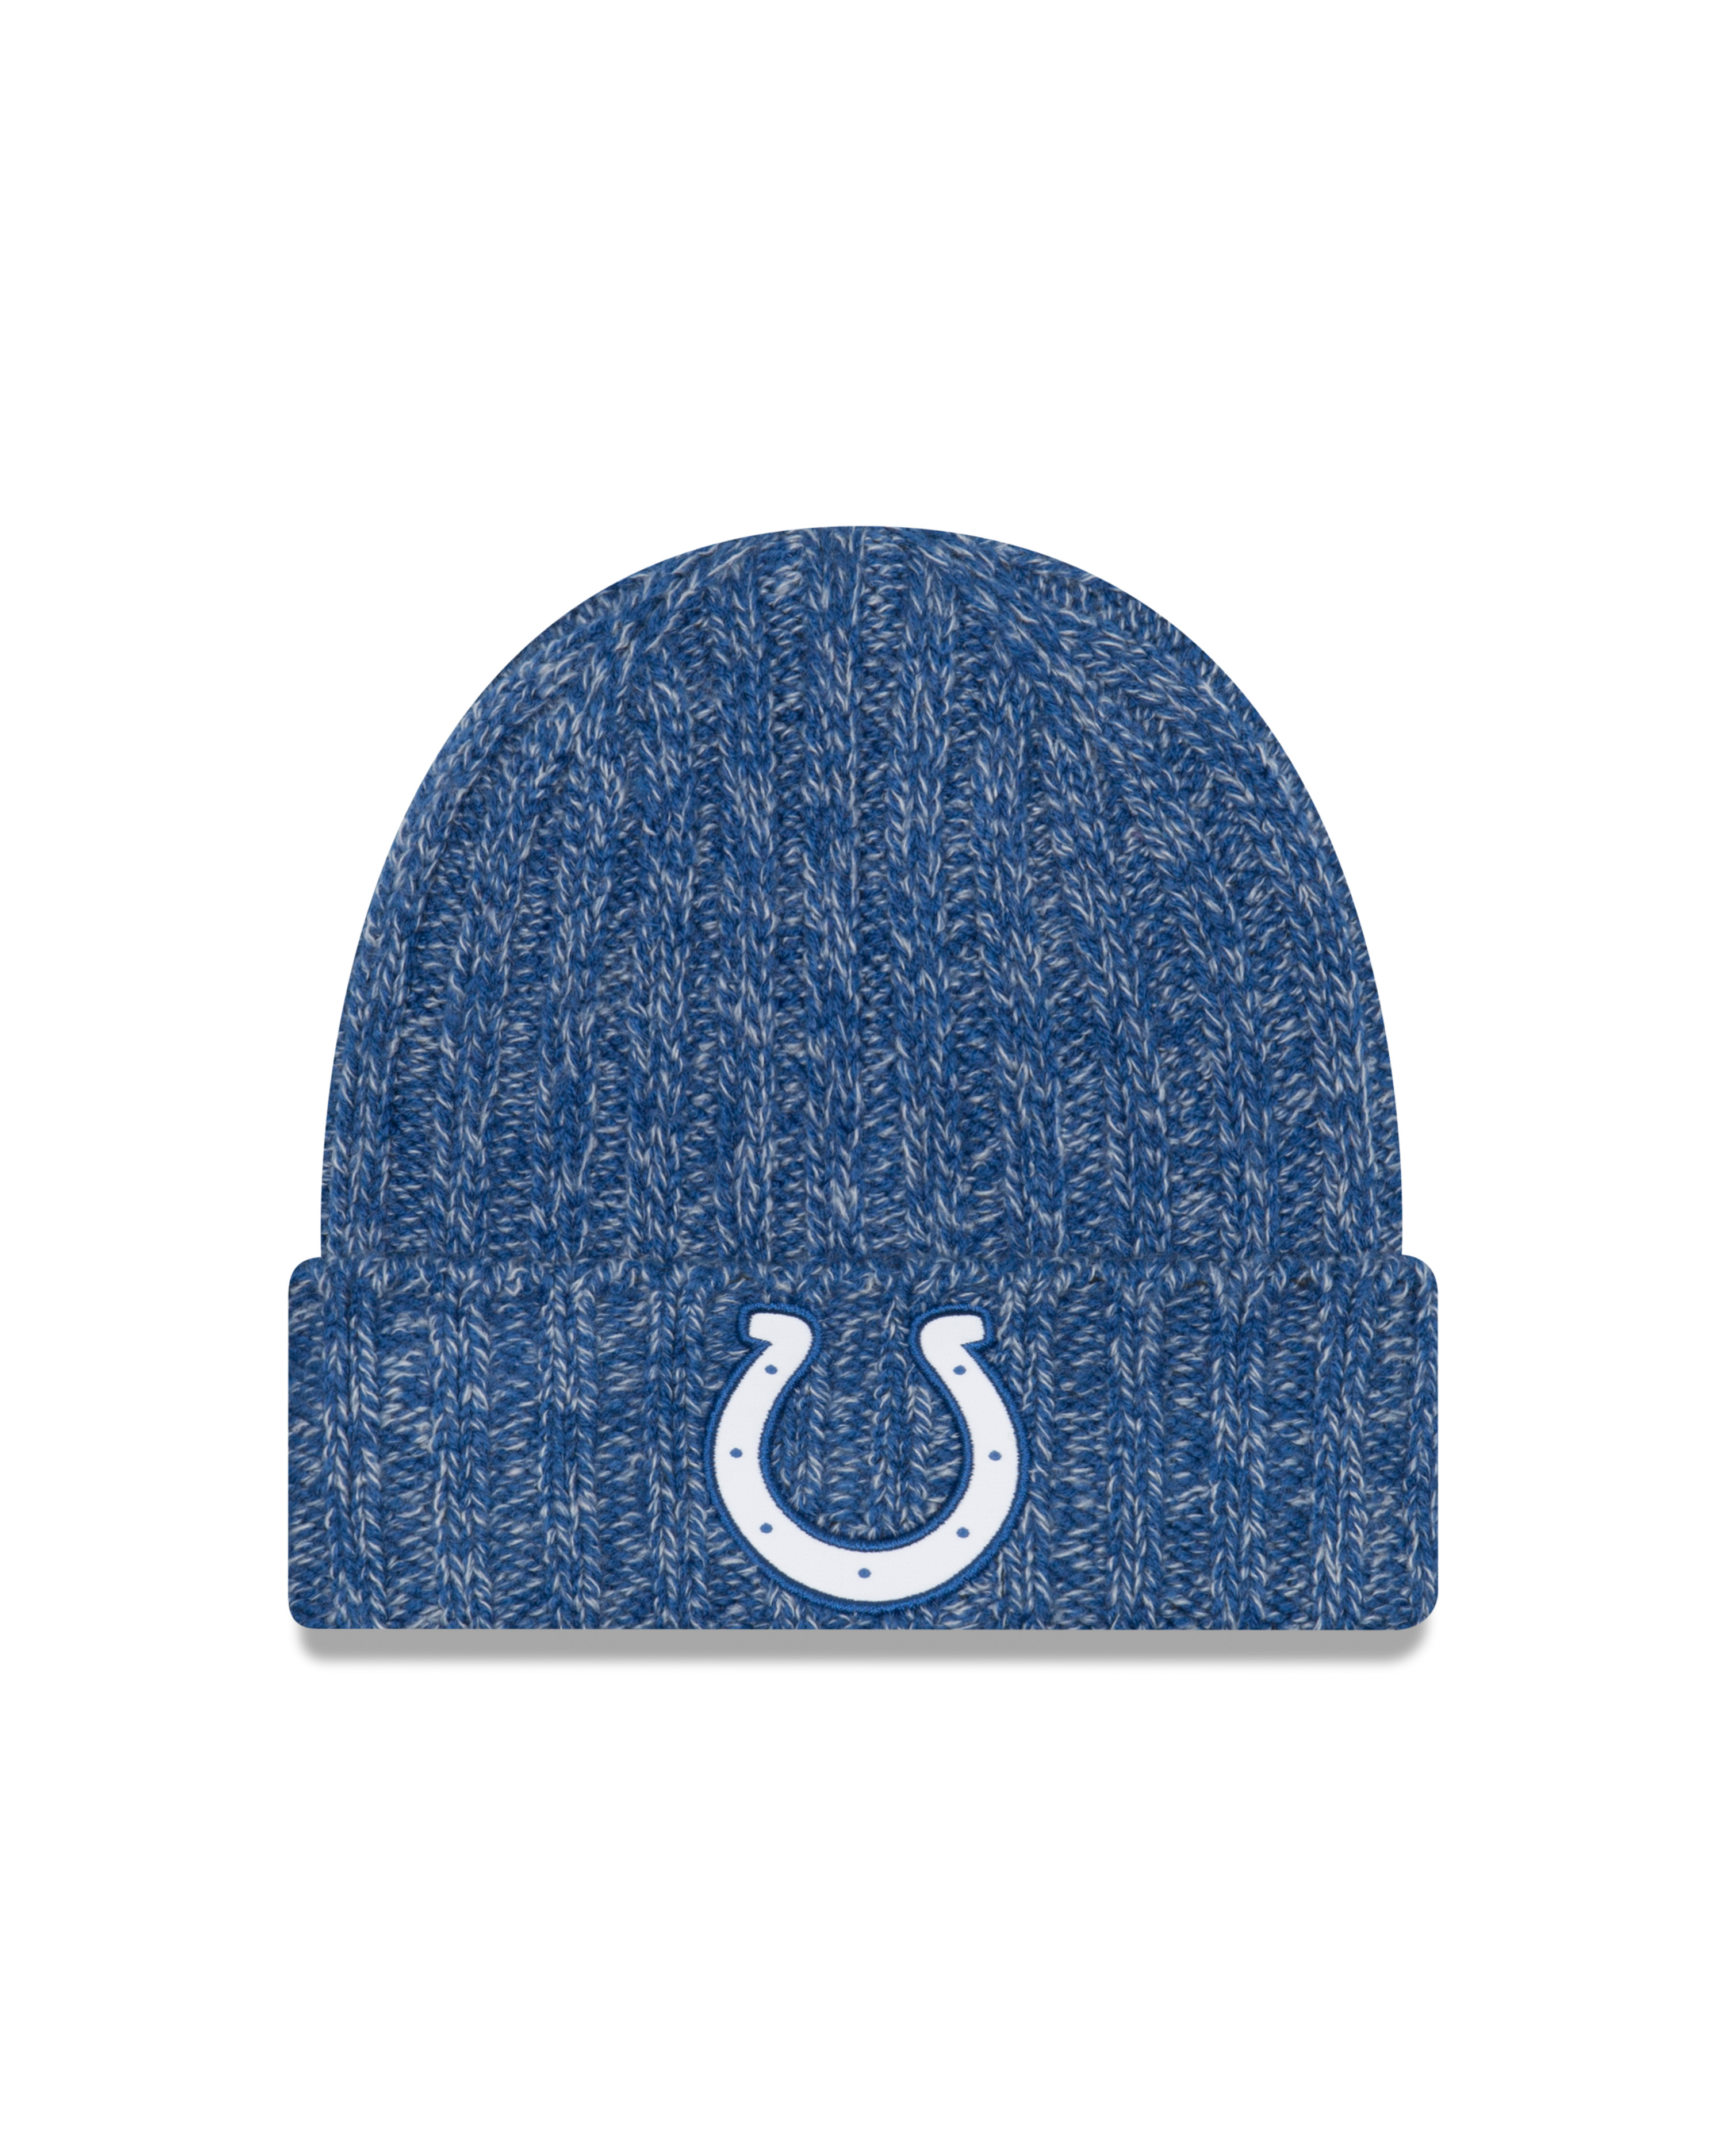 New Era Official NFL Cold Weather Collection #82